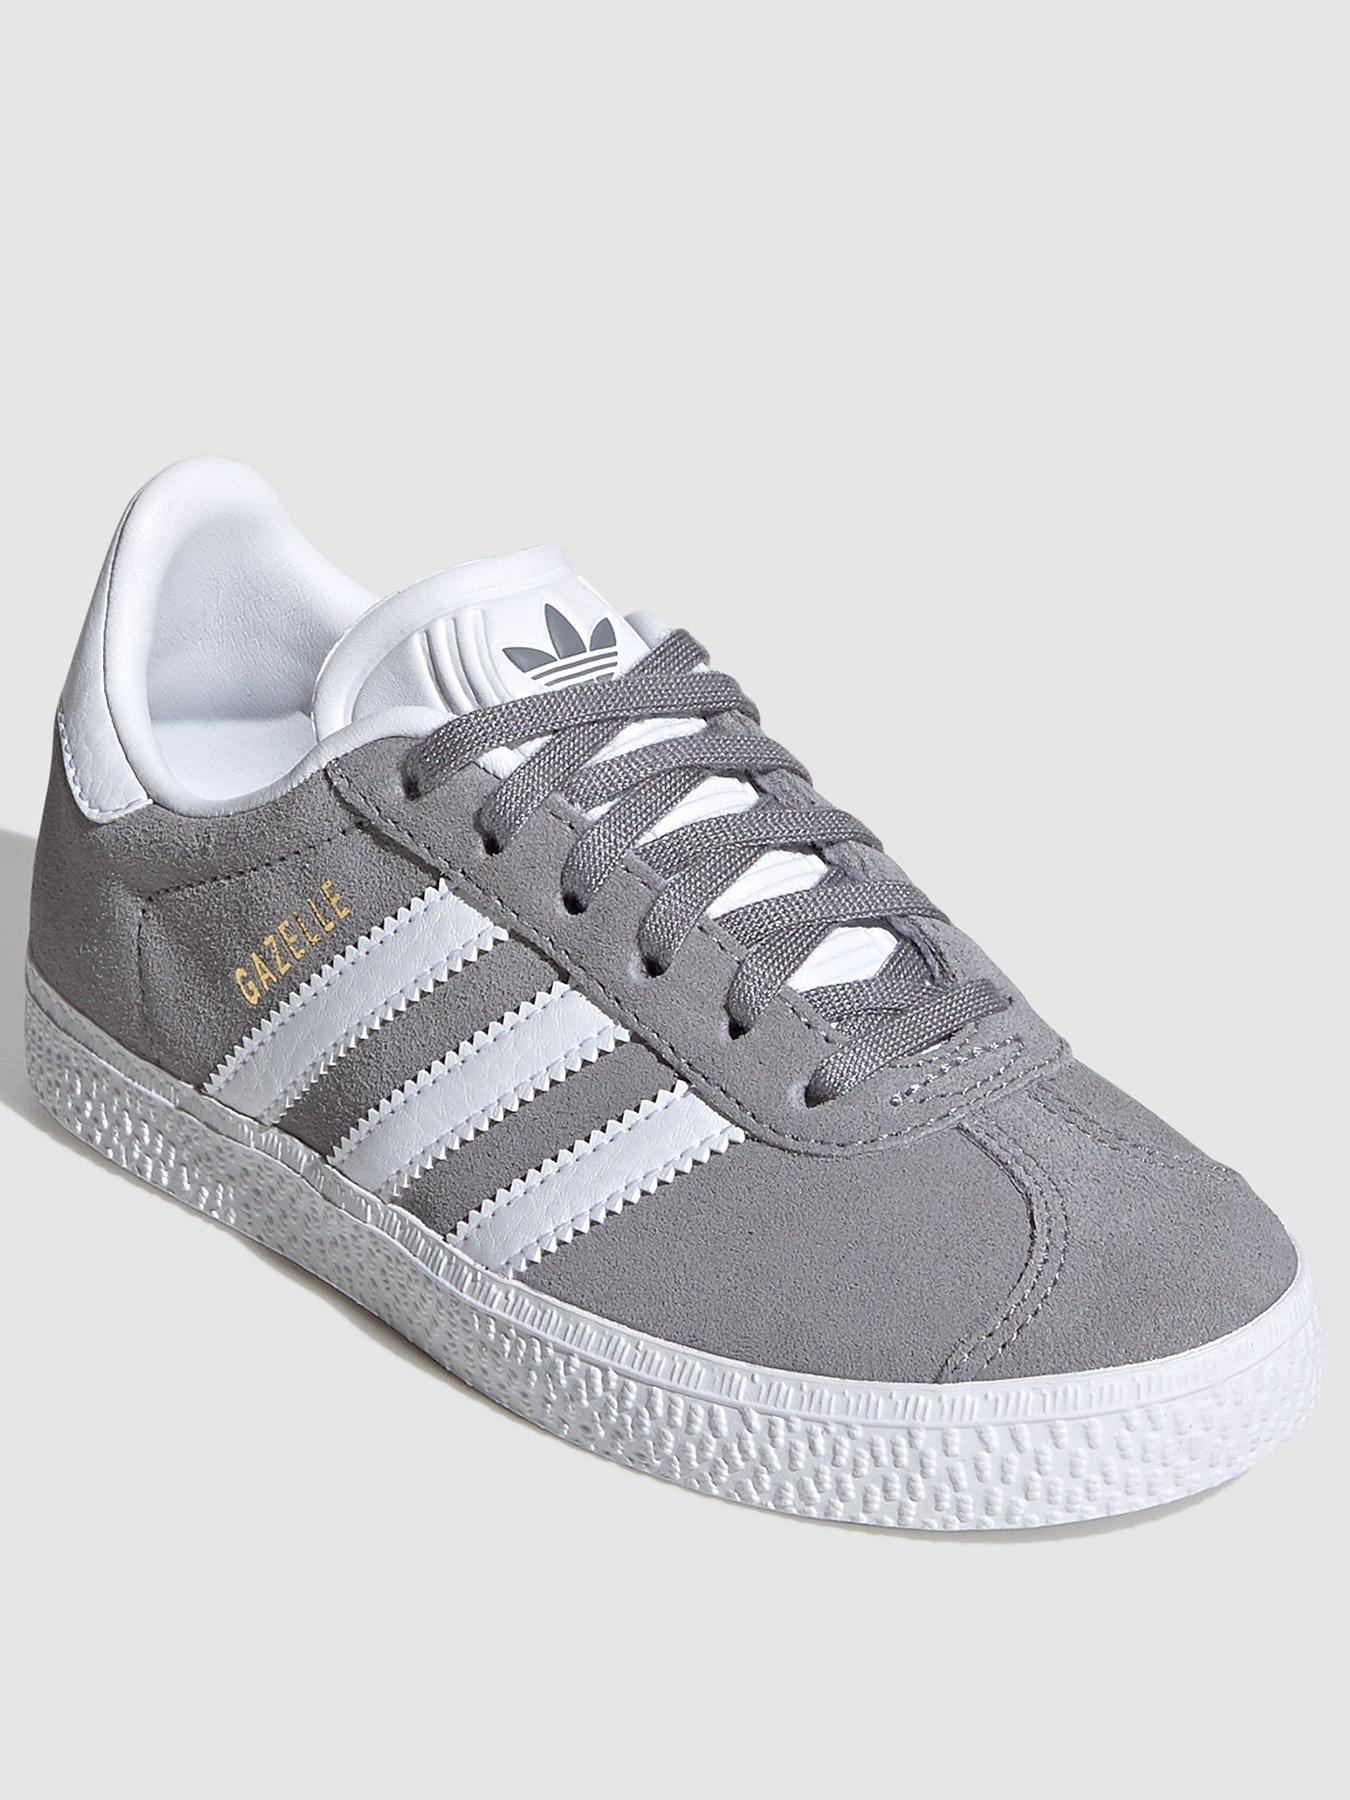 grey and white adidas trainers